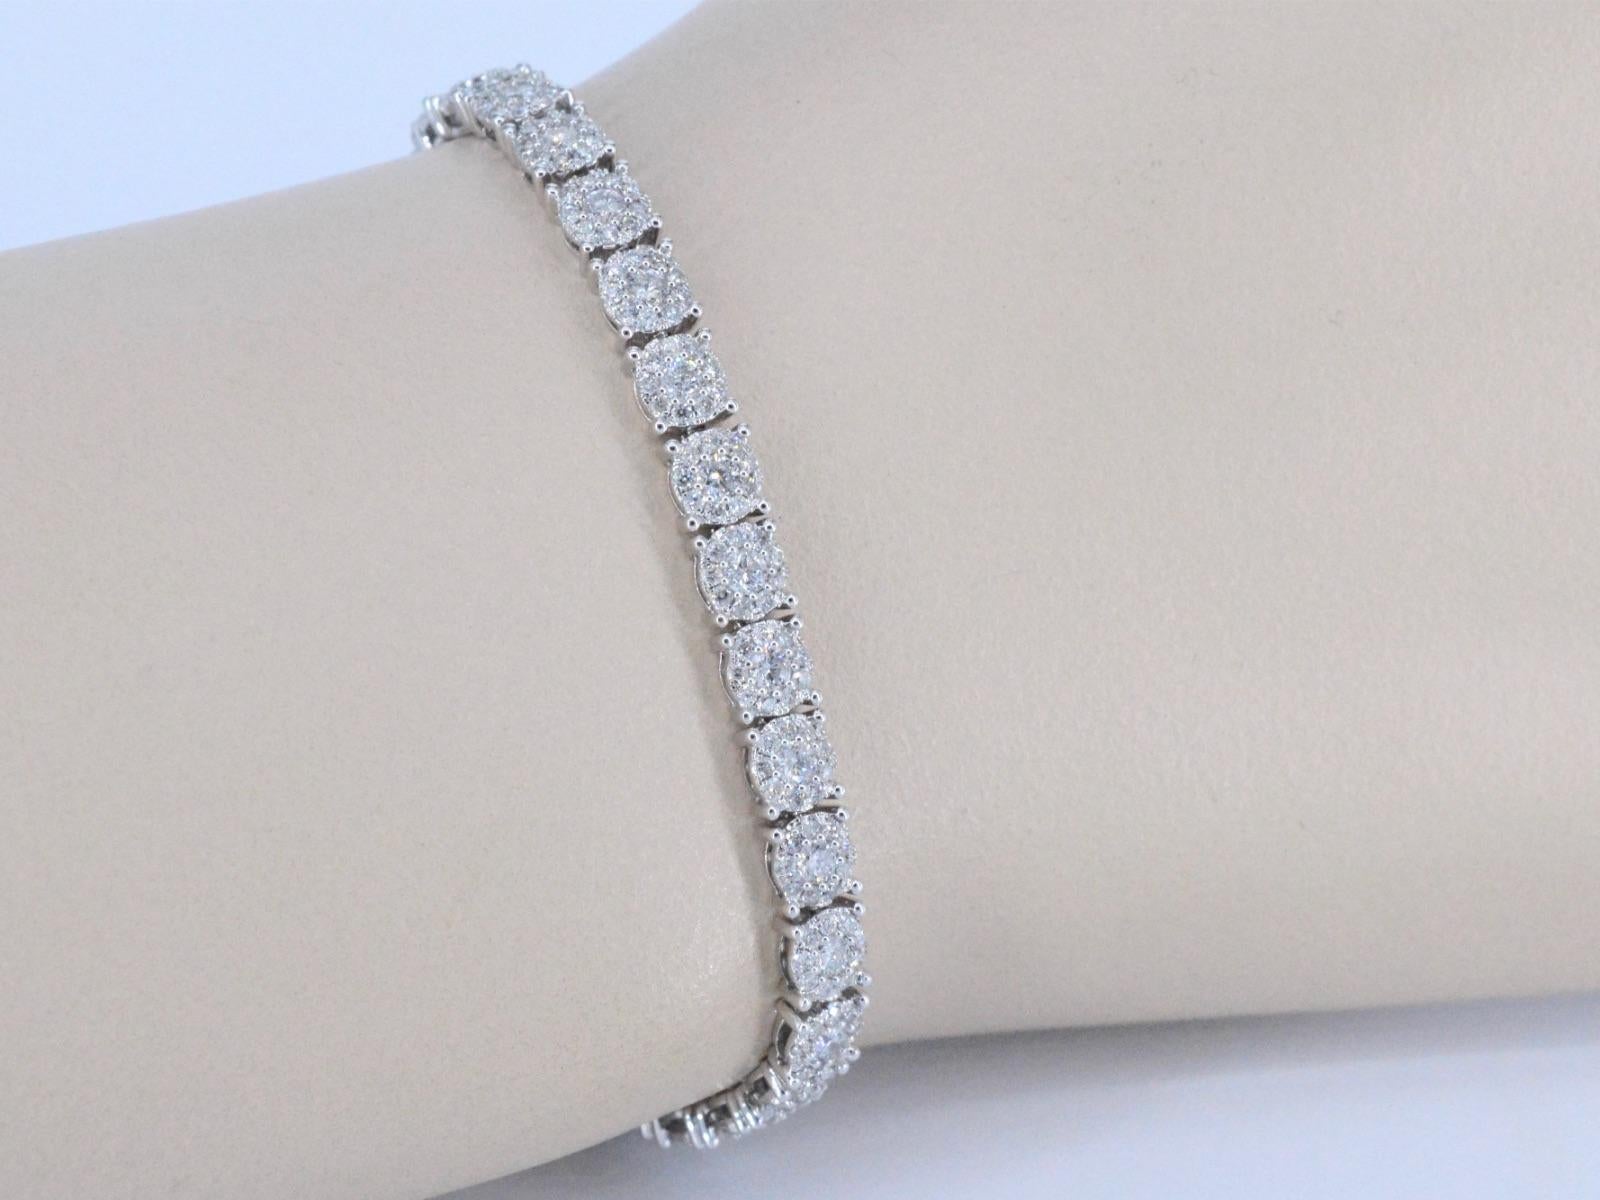 This stunning tennis bracelet is a true showstopper. Crafted from high-quality white gold, it features an exquisite design that showcases 4.00 carats of brilliant-cut diamonds. The diamonds are expertly set in a classic tennis style, creating a